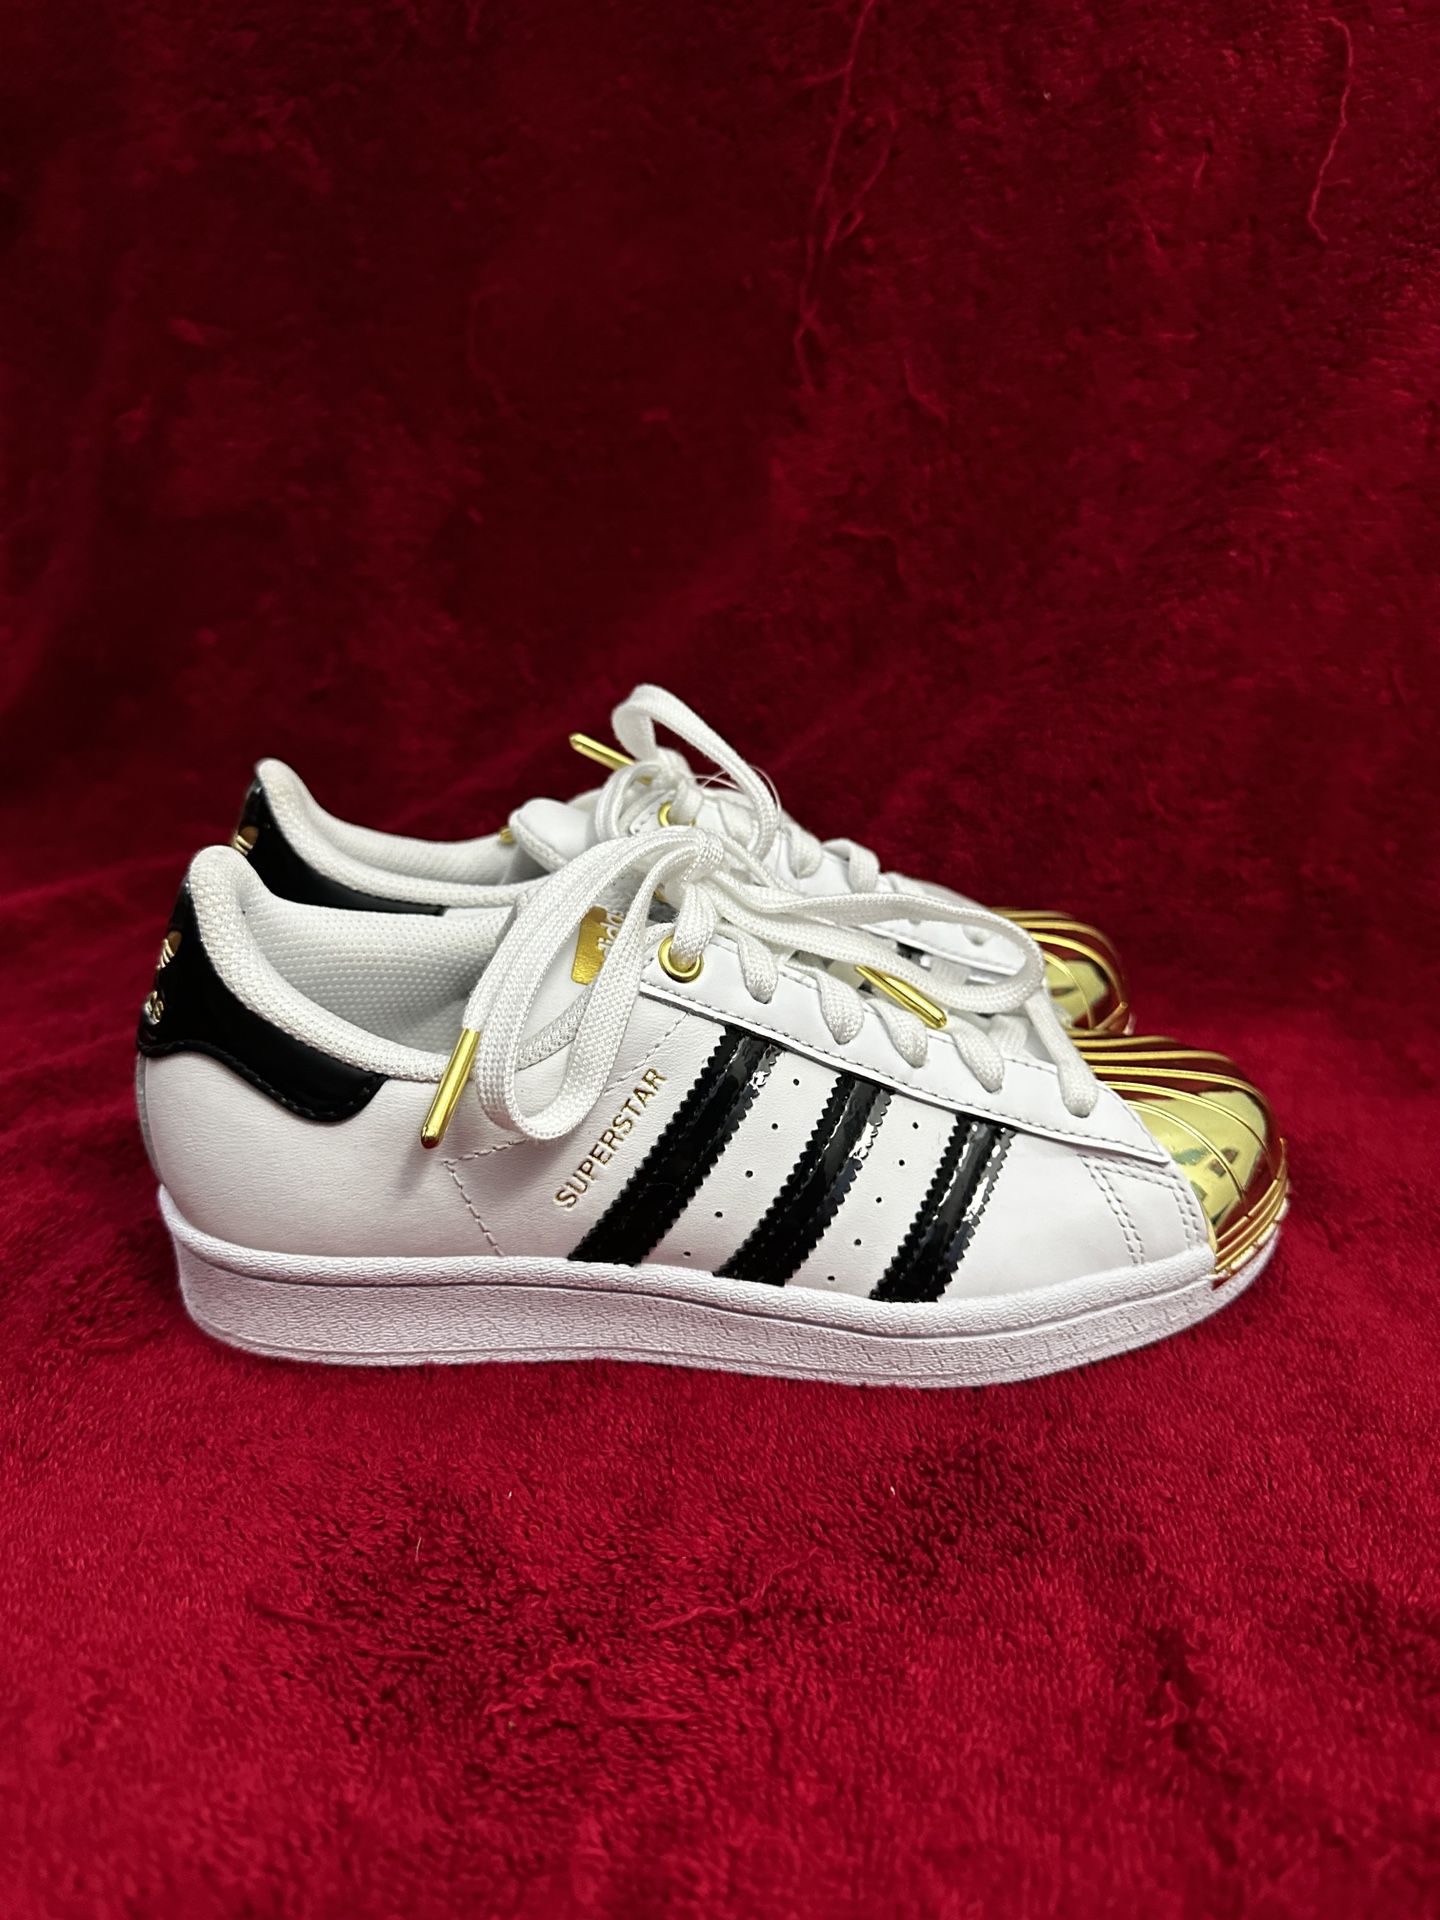 Adidas Metal Toe White Gold Size 5 FV3310 for Sale in San CA - OfferUp